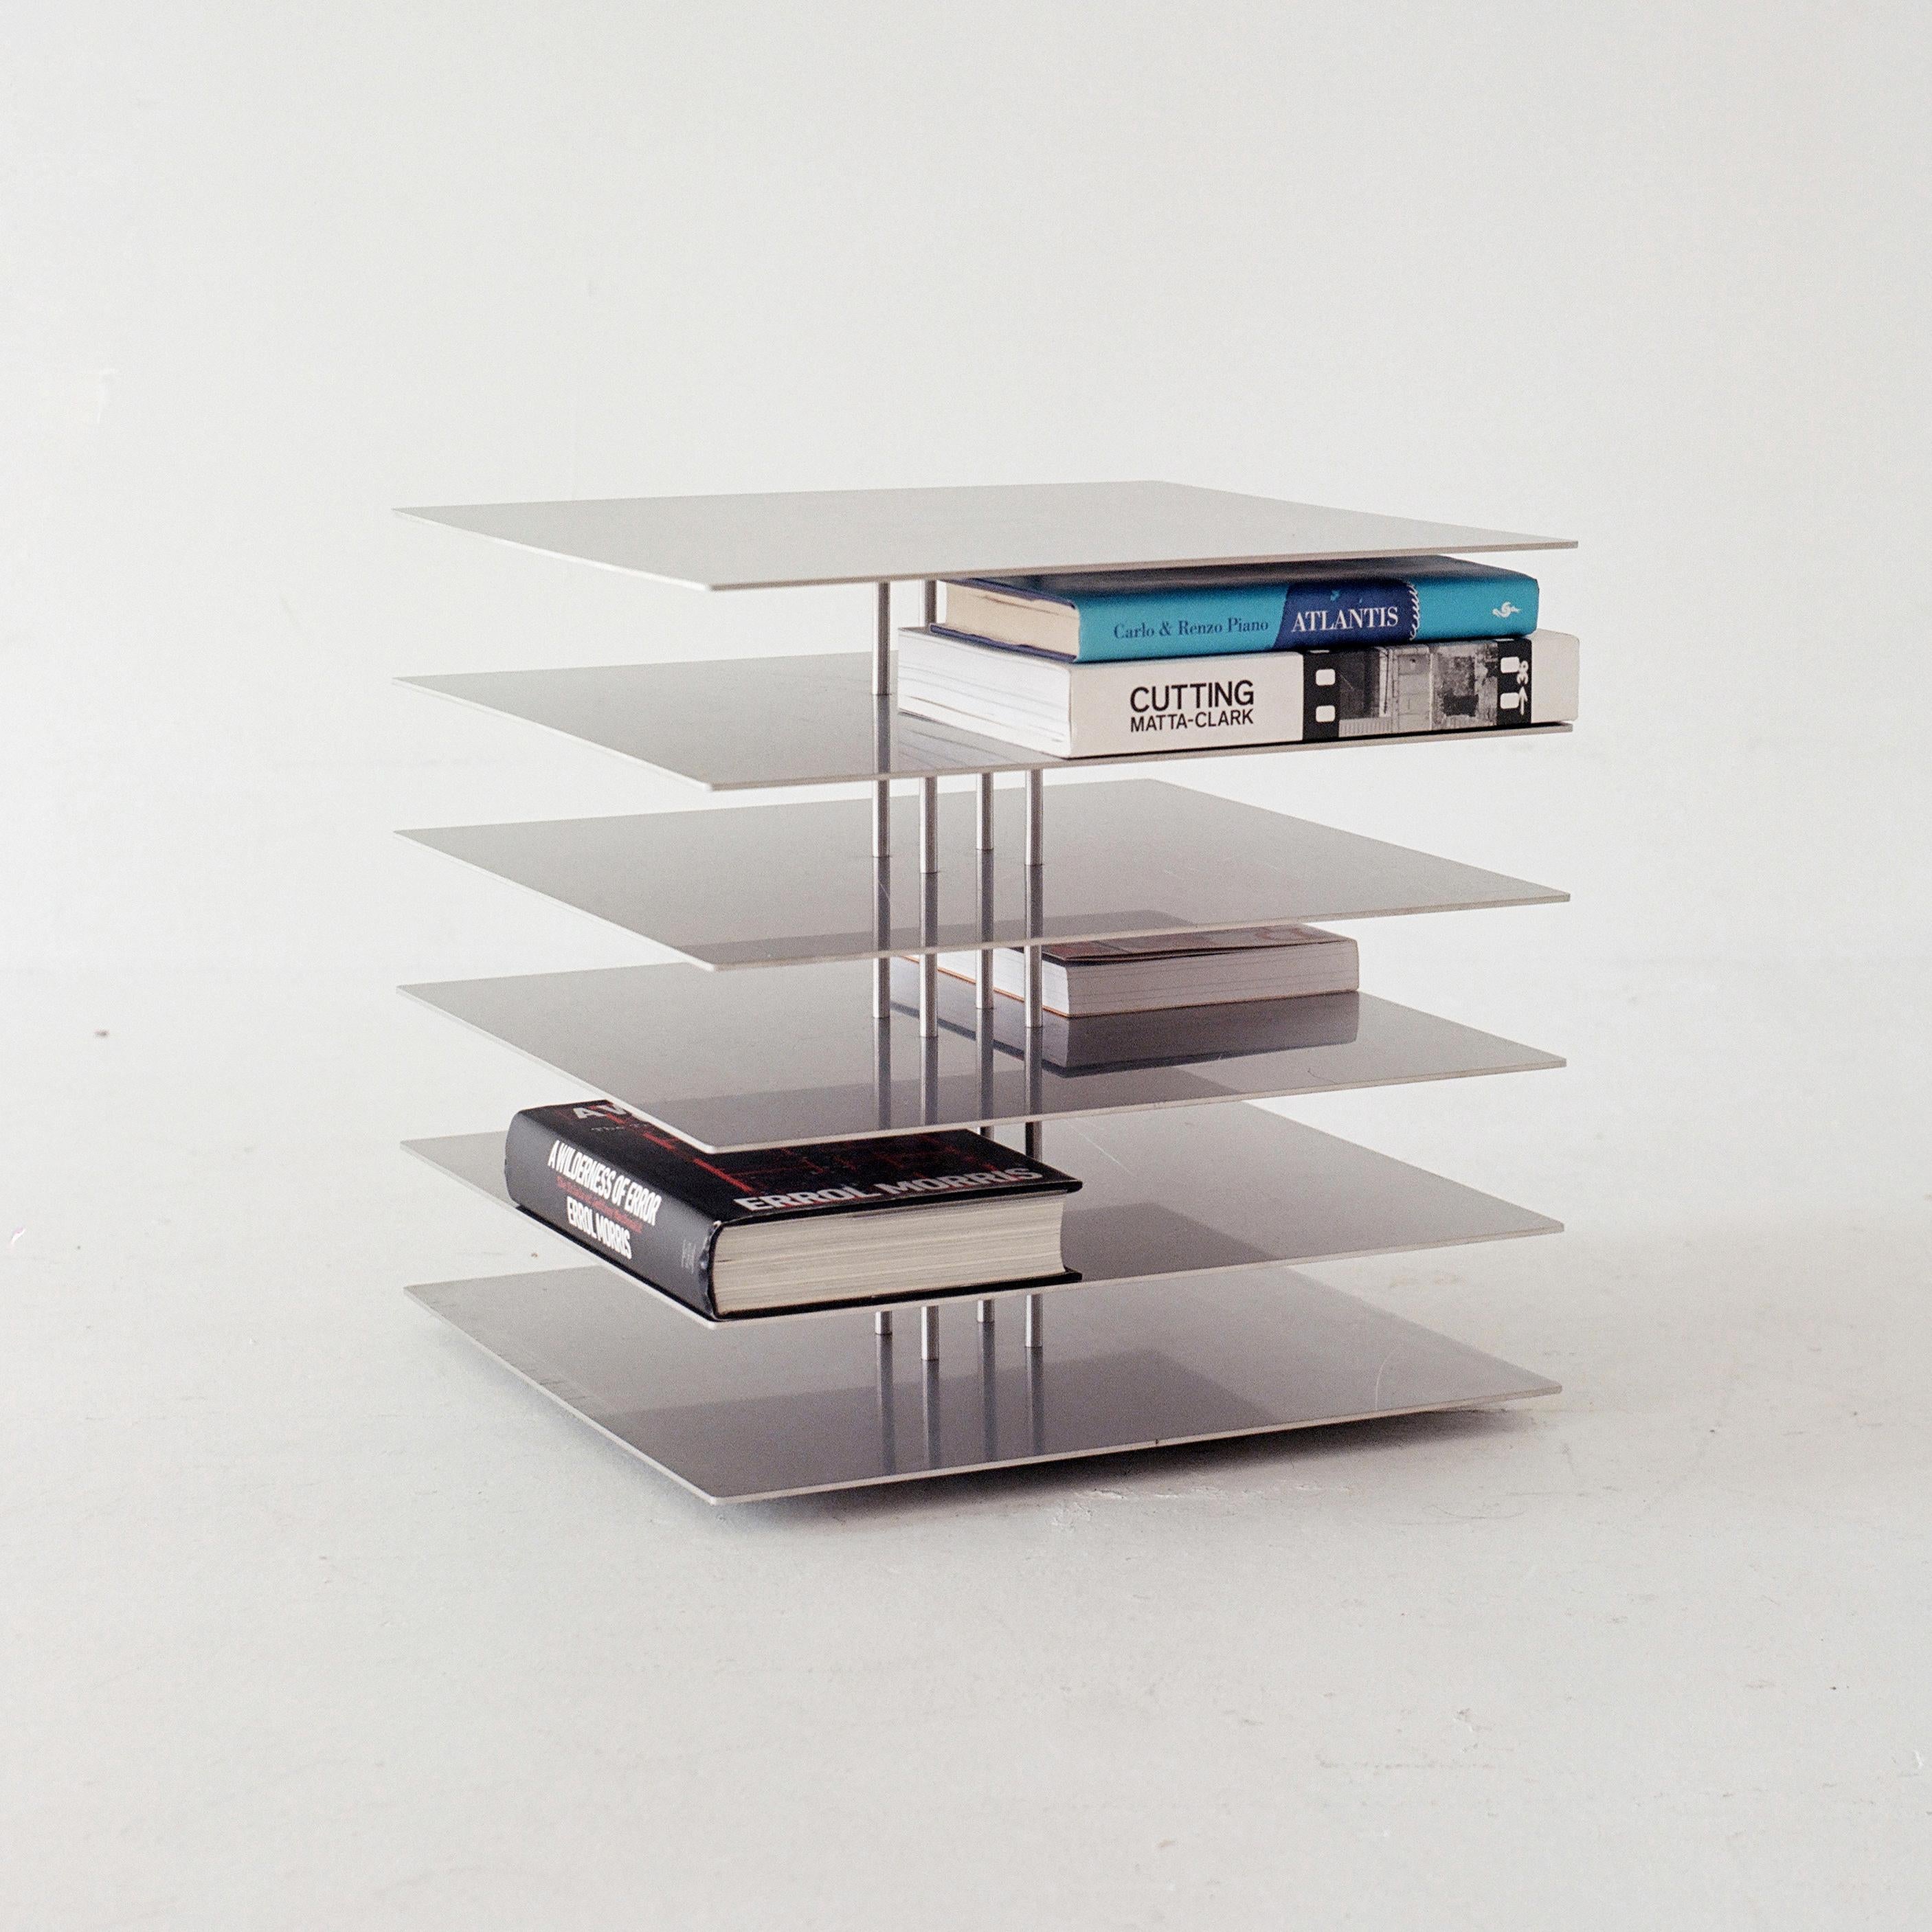 This stainless steel side table is inspired by Le Corbusier’s Dom-Ino House. The minimal form perfectly fits books around the central columns, and at certain angles, the structure disappears, showing only an array of floating metal plates. The piece